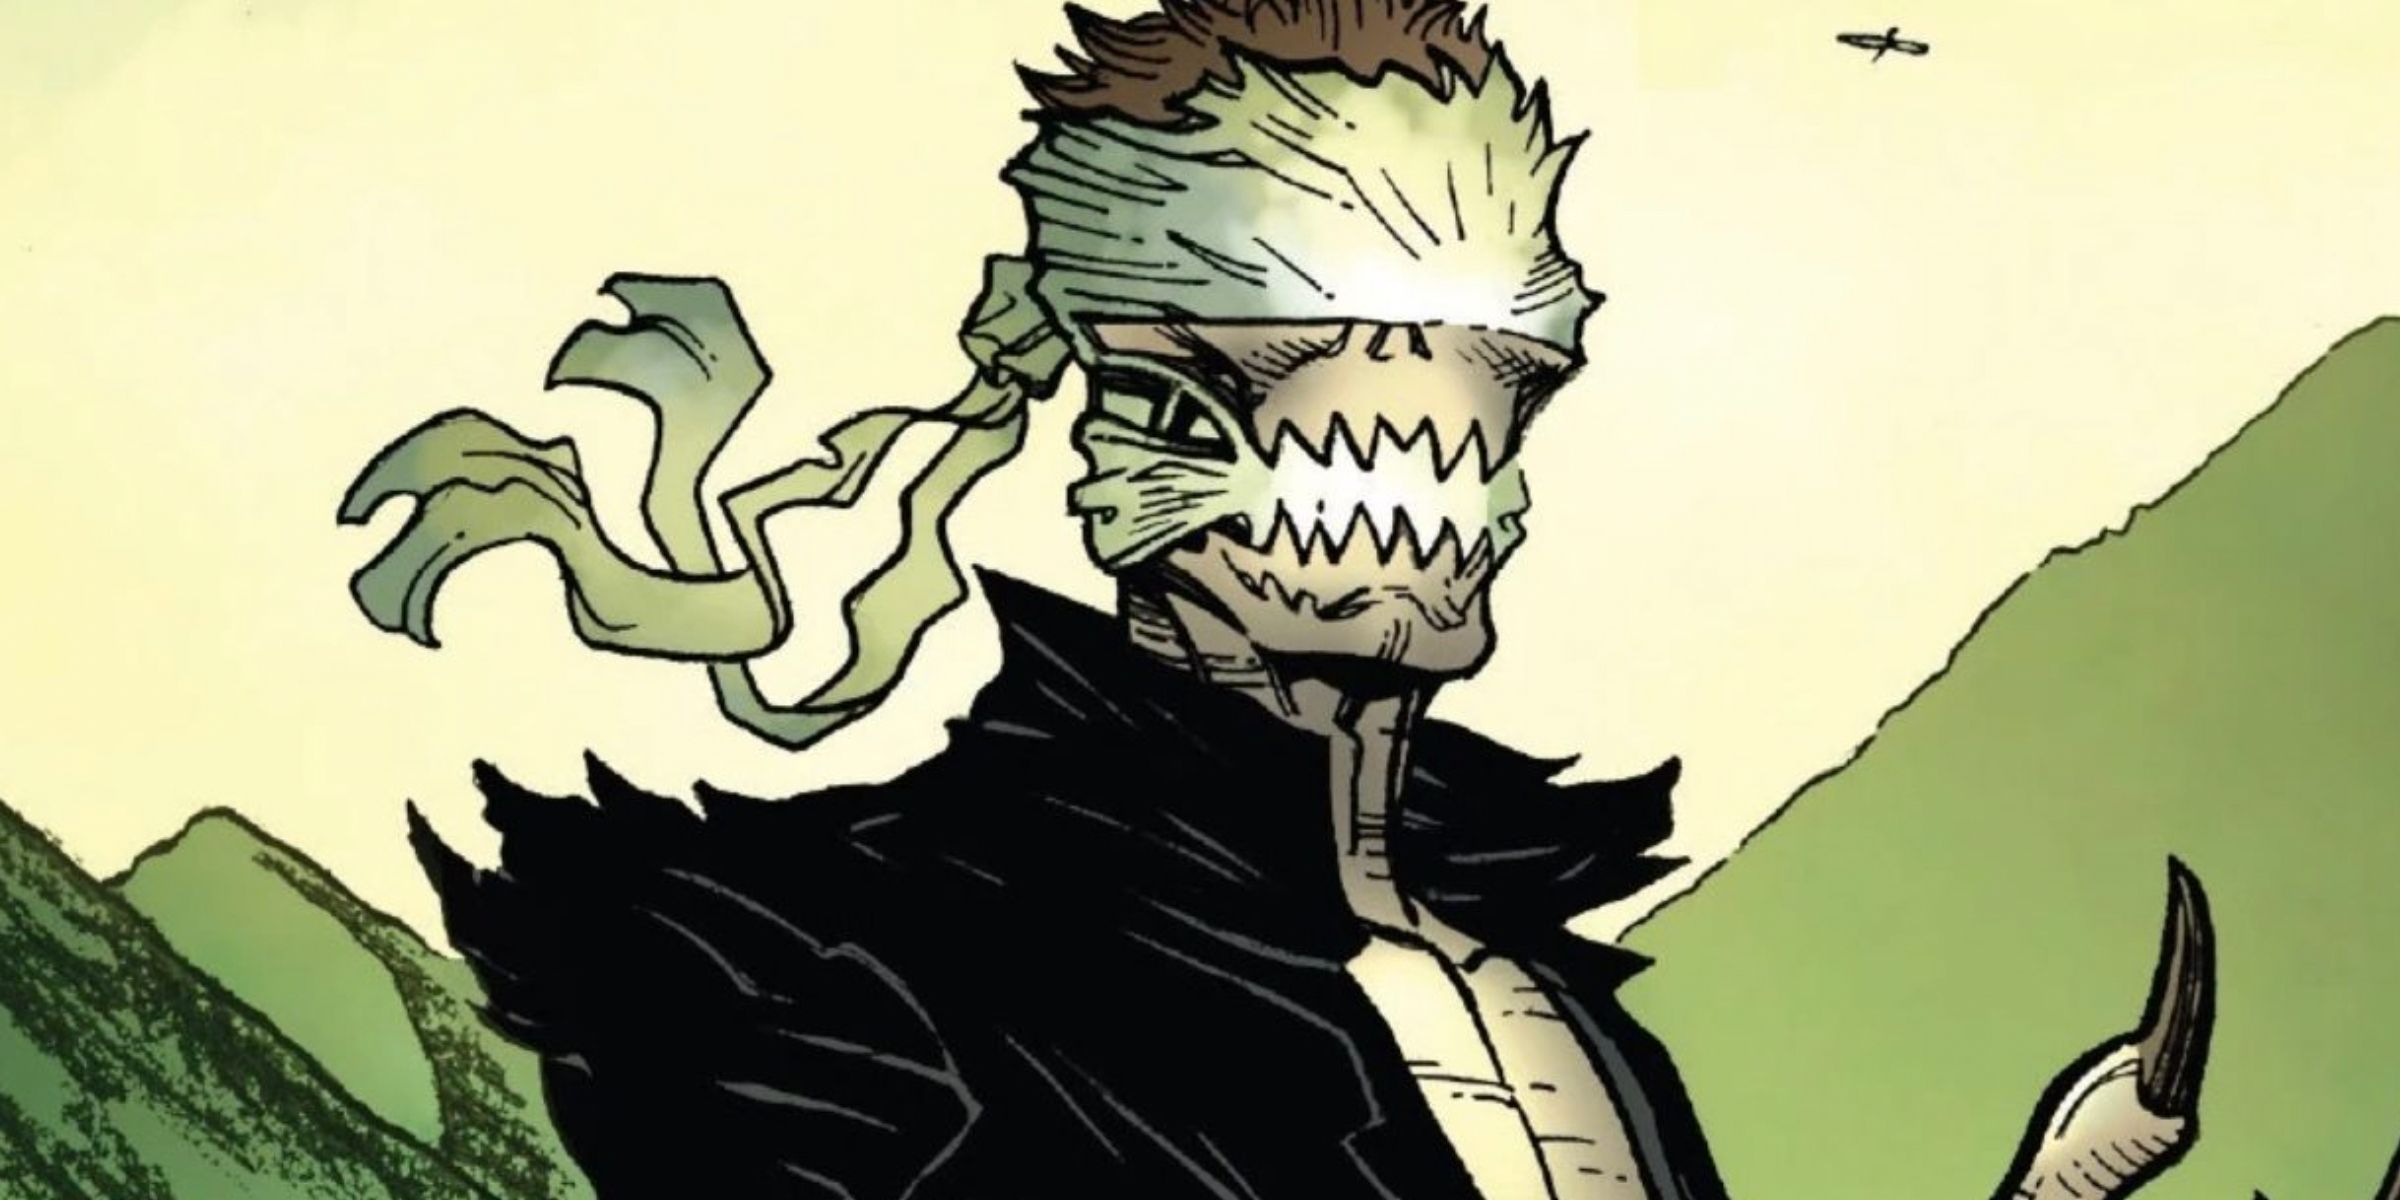 Styx is blindfolded against a green background in Marvel comics